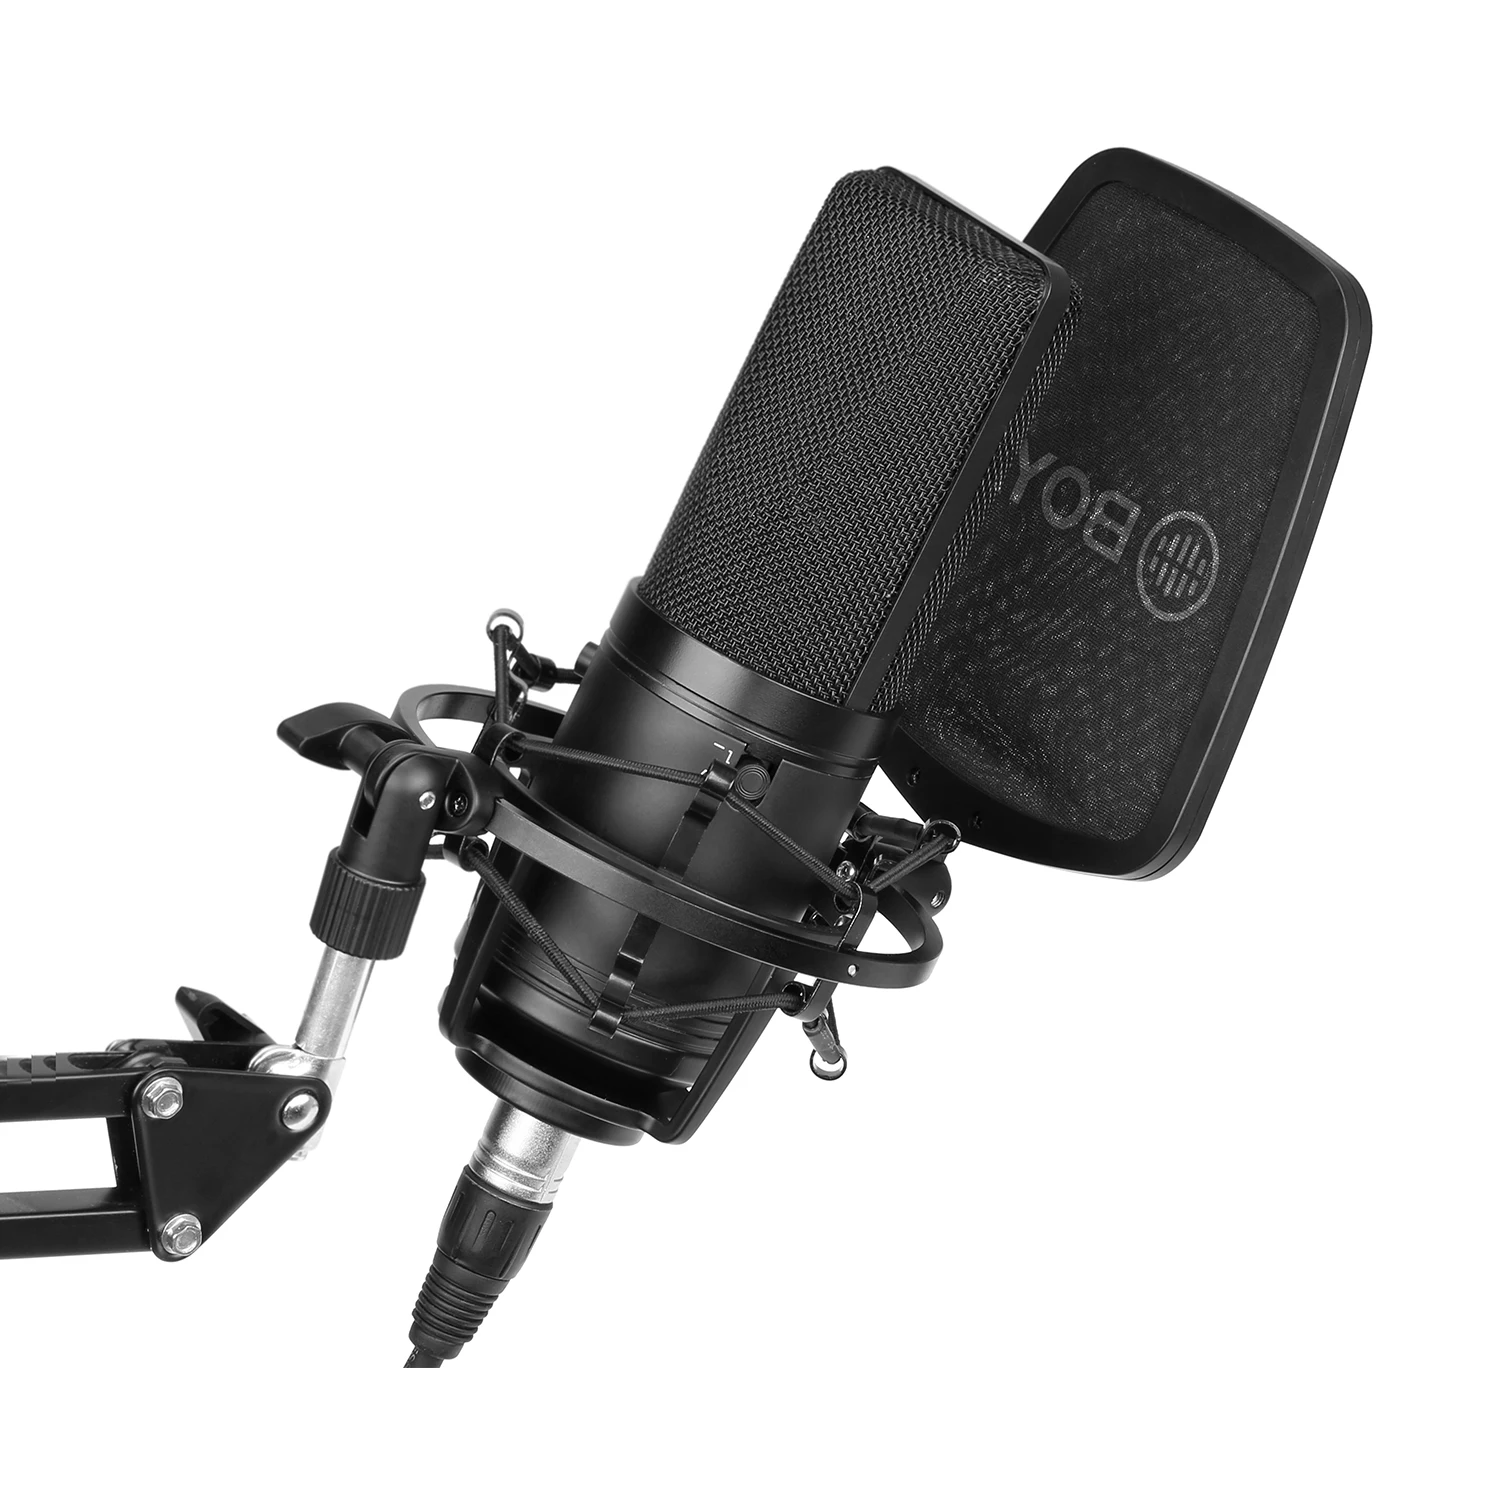 

BOYA BY-M1000 Audio Large Diaphragm Studio Condenser Microphone for Vocal Recording Singer Podcast Broadcast YouTube Video